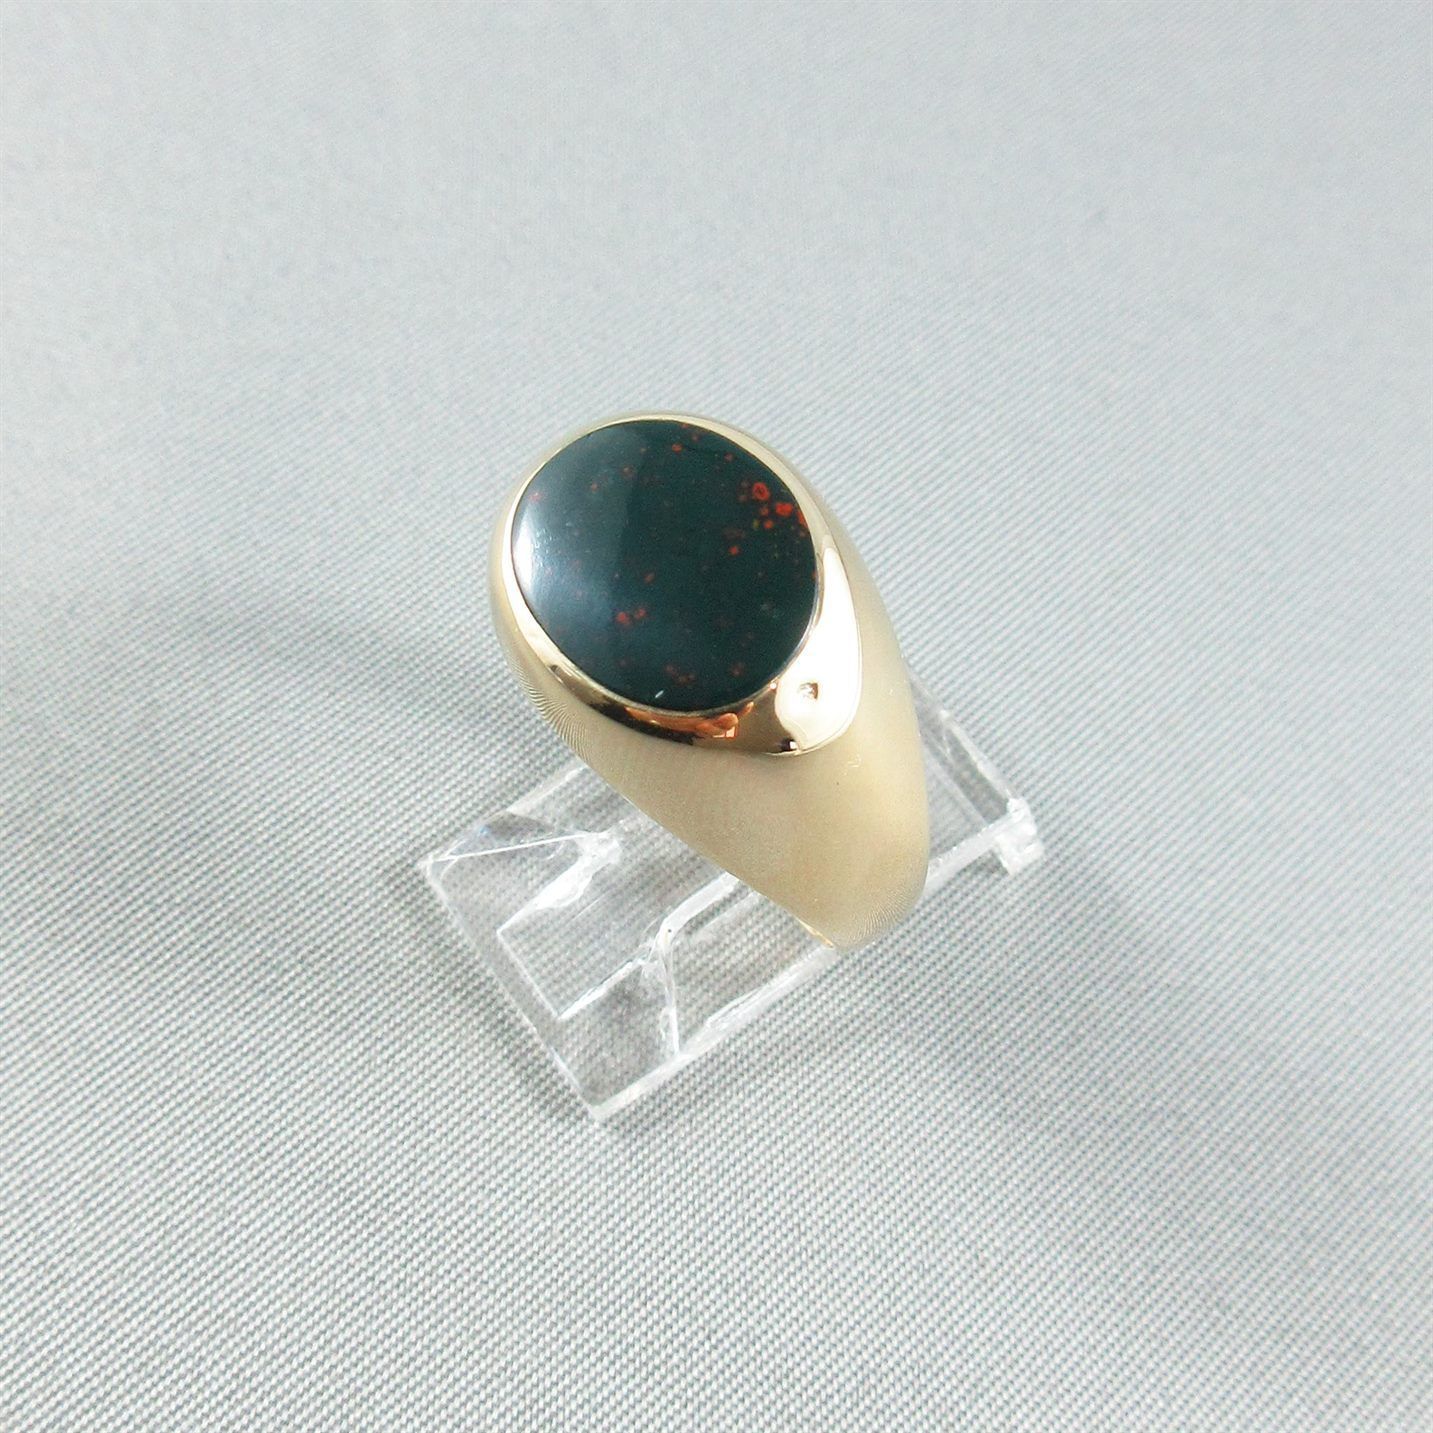 Buy Bloodstone, Ring, in Oxidized Silver, Red, Bloodstone, Statement Ring,  Size 7.5 Online in India - Etsy